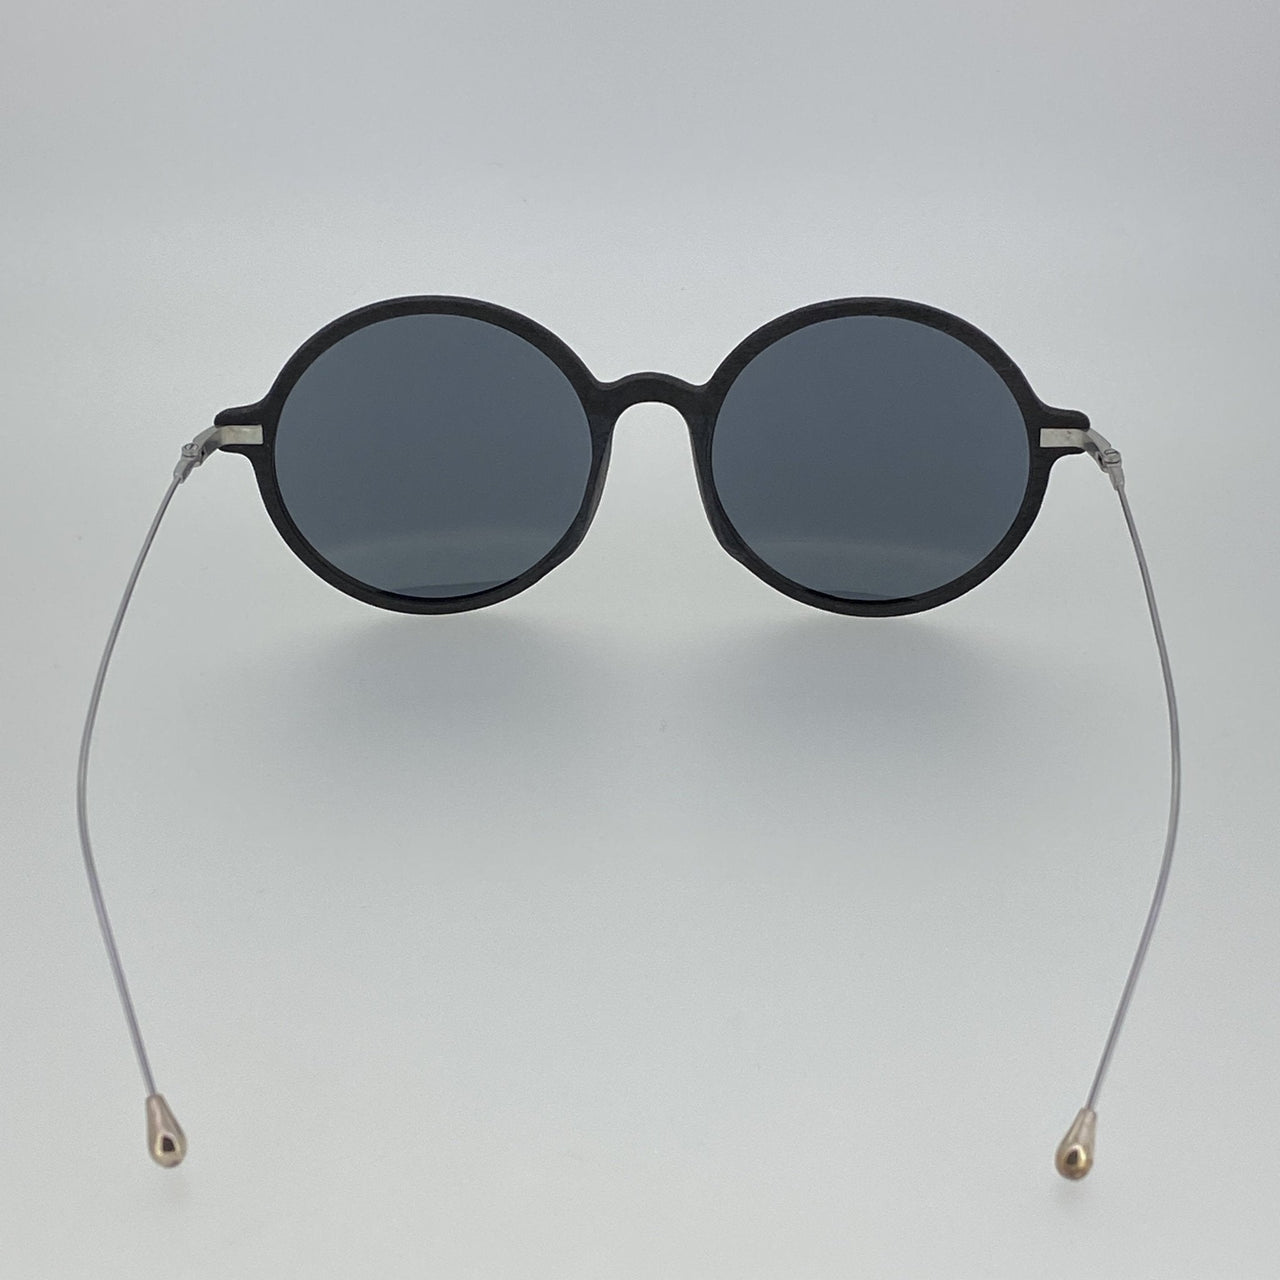 Ann Demeulemeester Sunglasses Round Black Scratch Texture and Titanium with 925 Silver Temple Tips Grey Mirror Lenses CAT3 AD54C2SUN - Watches & Crystals